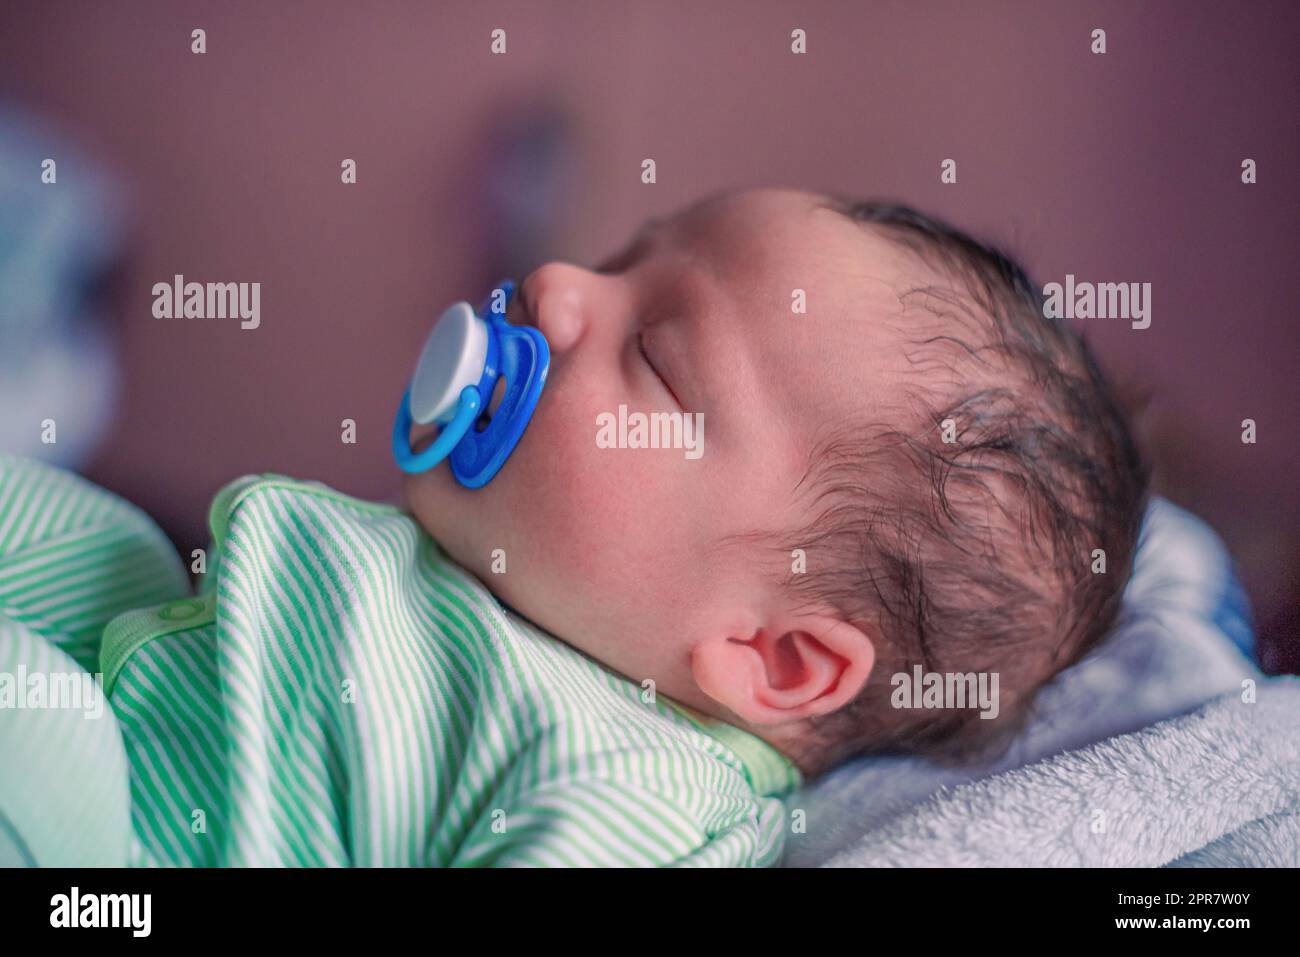 Face profile portrait of a sleeping newborn baby with a pacifier in his mouth Stock Photo